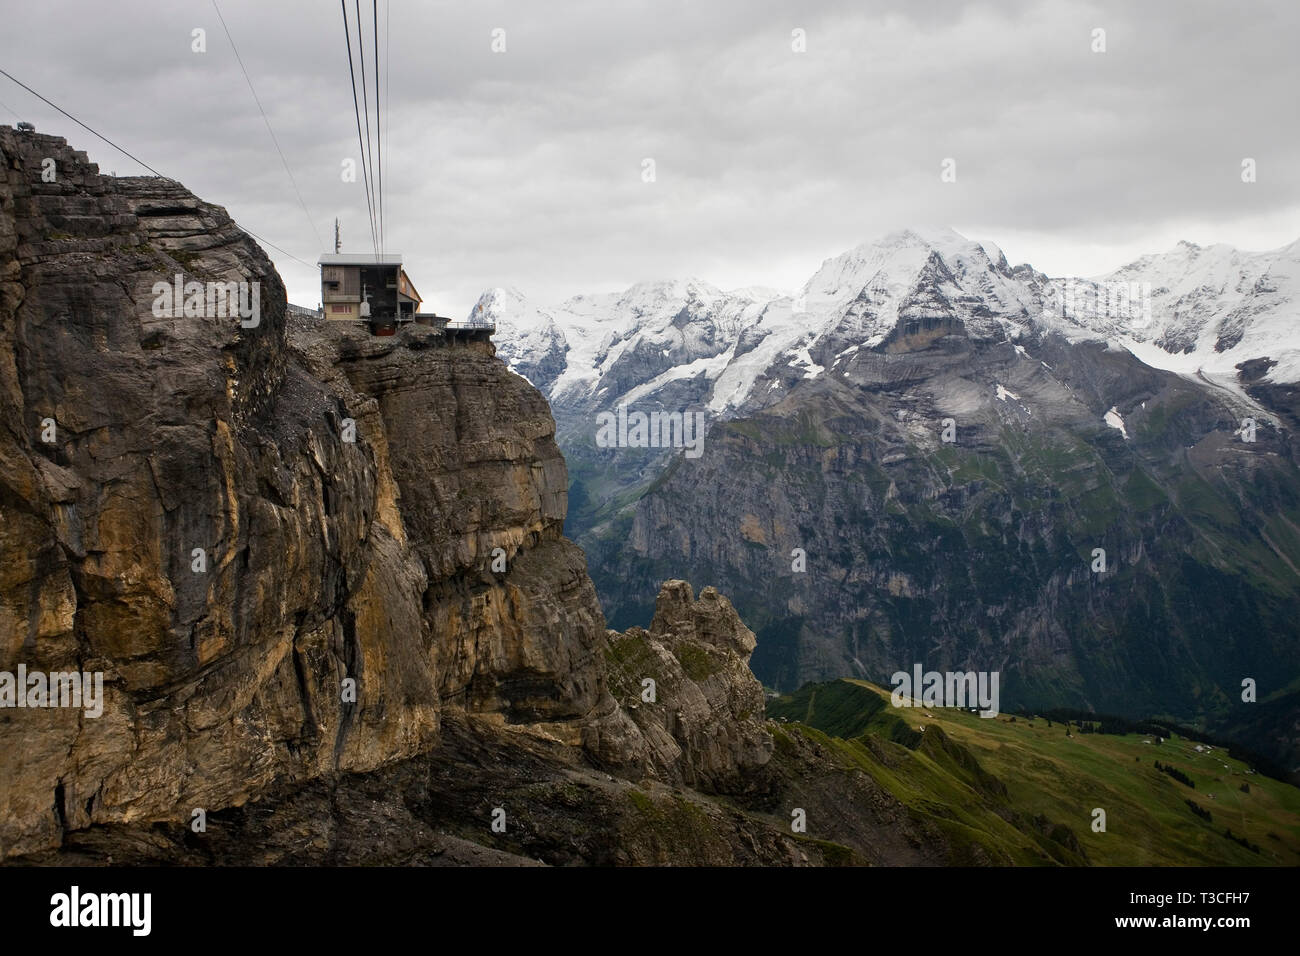 The Birg cablecar station perched above a cliff with the Jungfrau Massif and the Lauterbrunnen valley beyond, Bernese Oberland, Switzerland Stock Photo